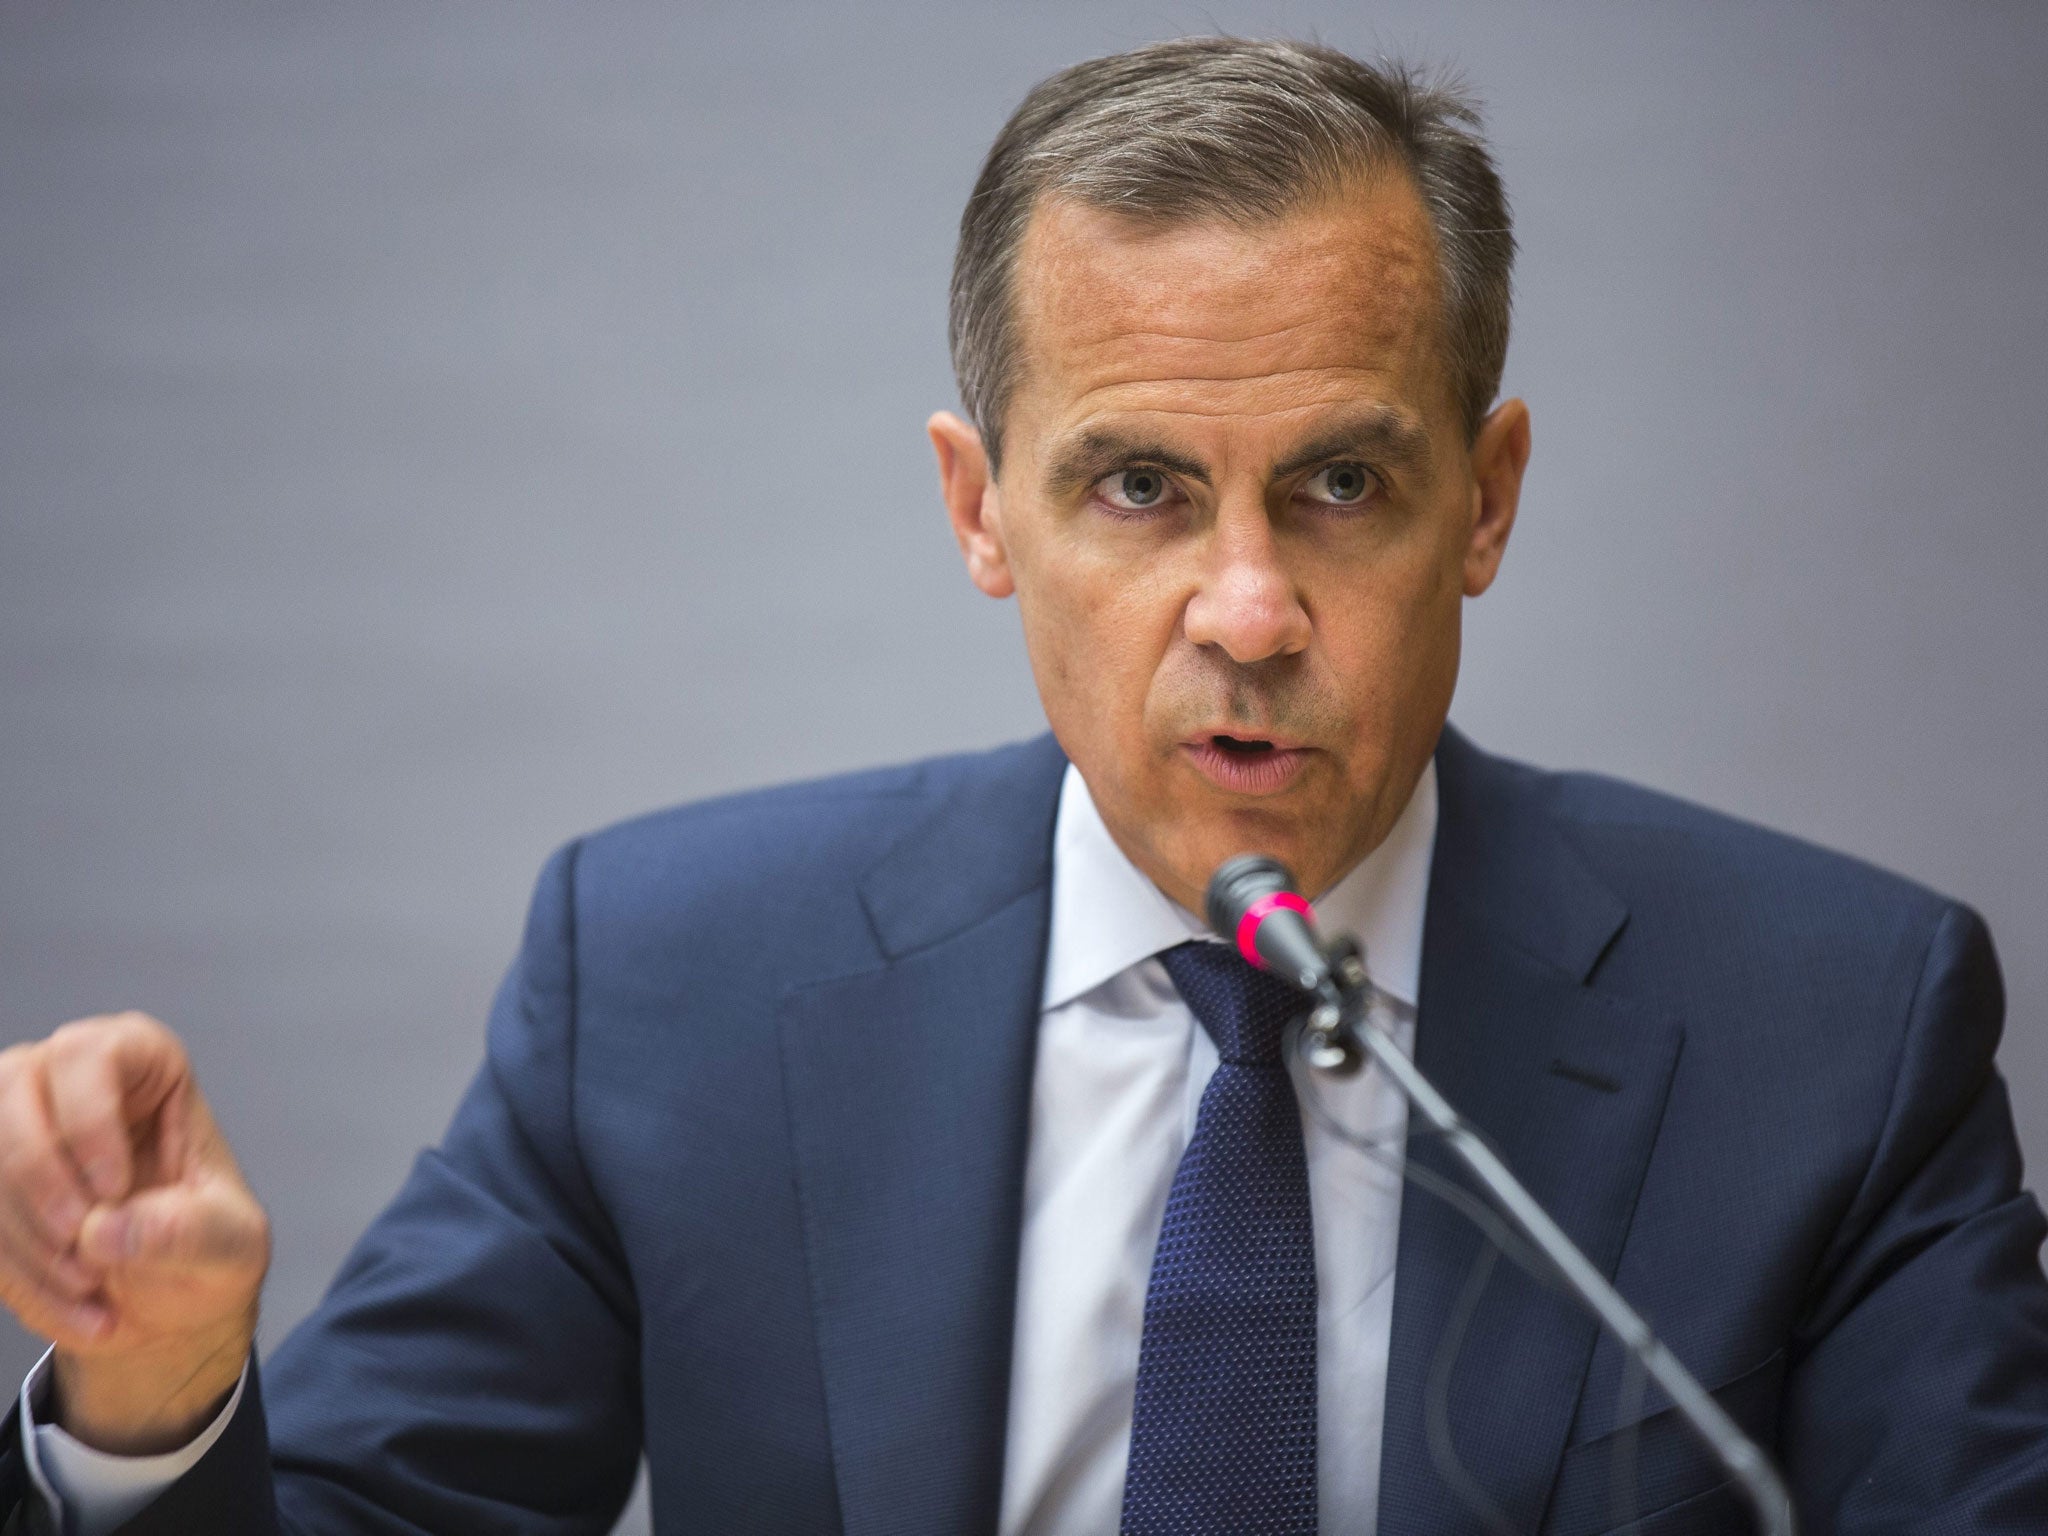 Mark Carney suggested today that the Bank of England should have the full and formal power to set maximum leverage ratios for commercial lenders.